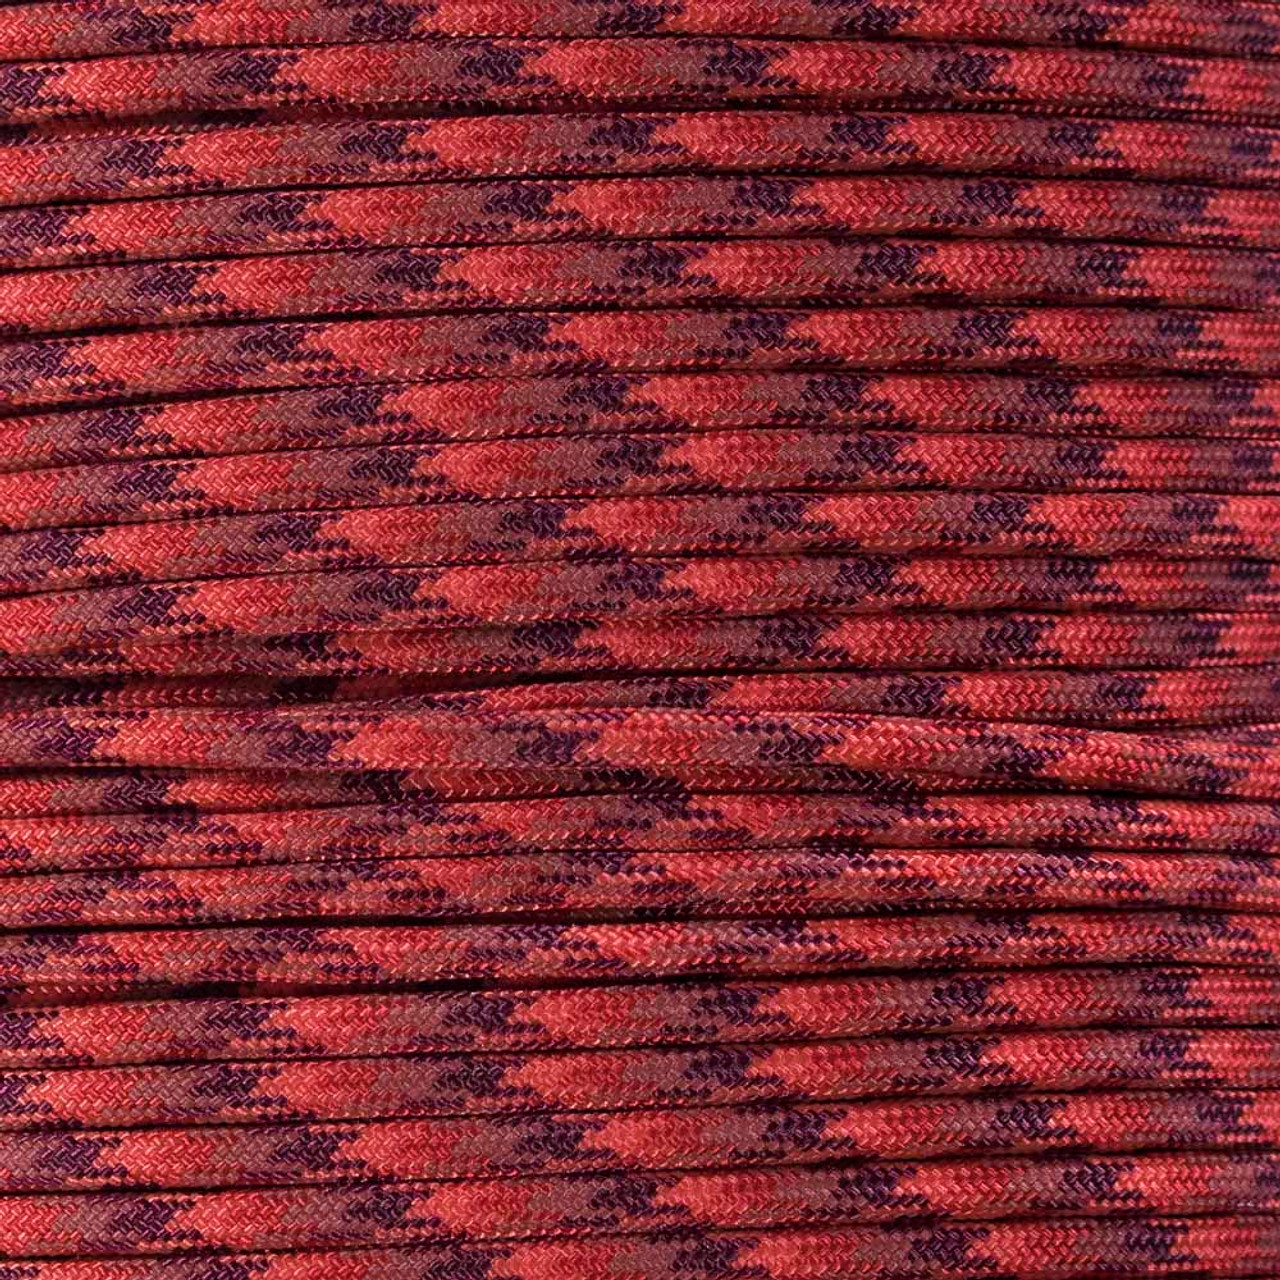 Red Blend - 550 Paracord